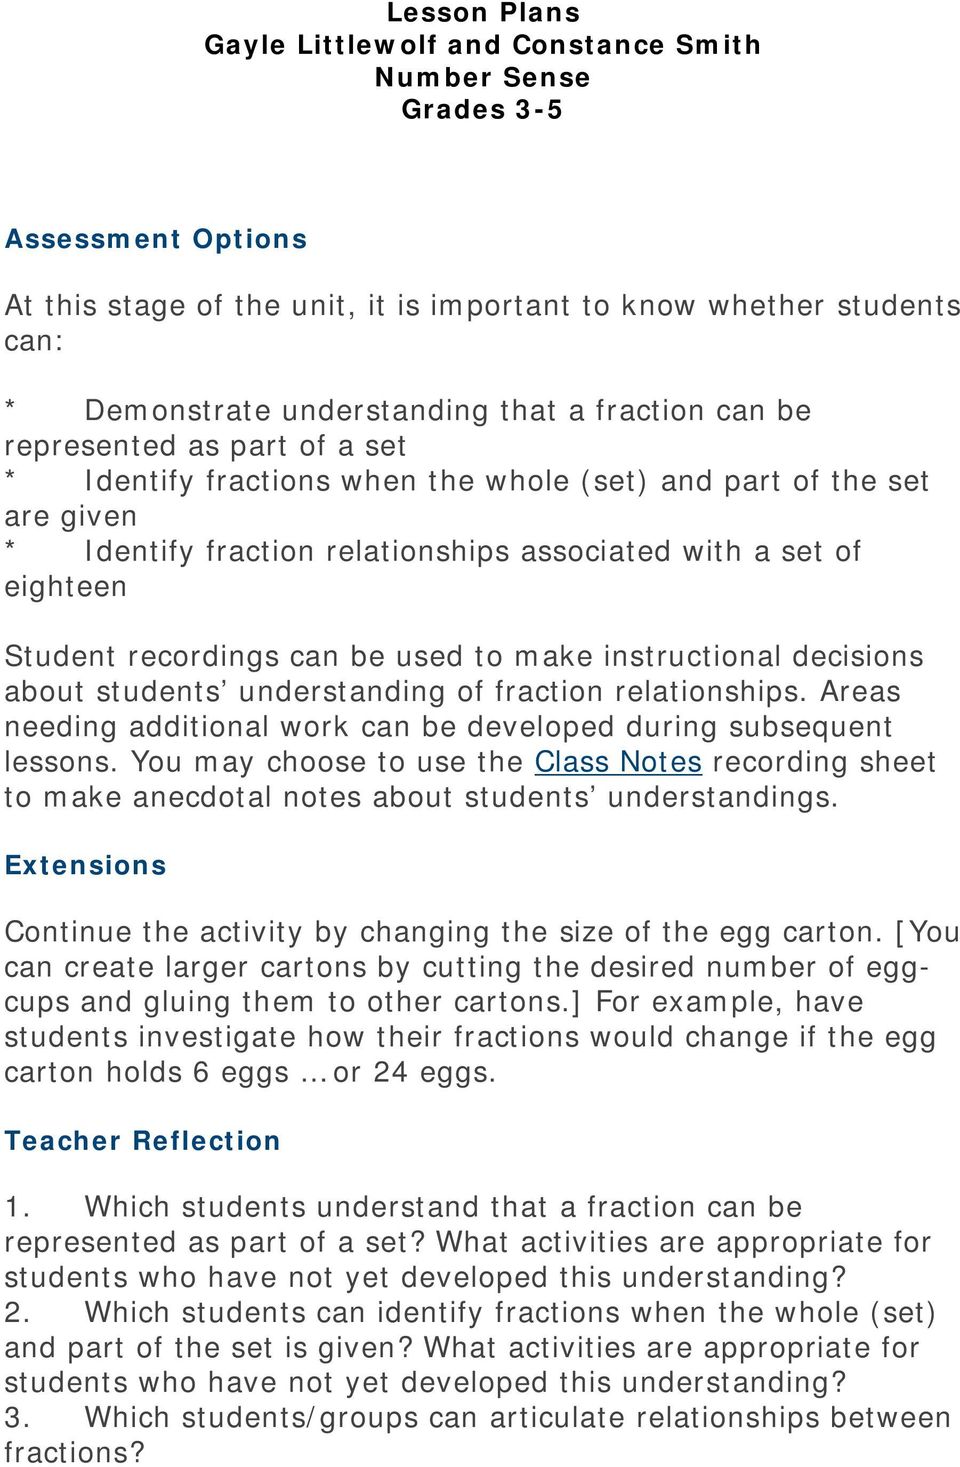 understanding of fraction relationships. Areas needing additional work can be developed during subsequent lessons.